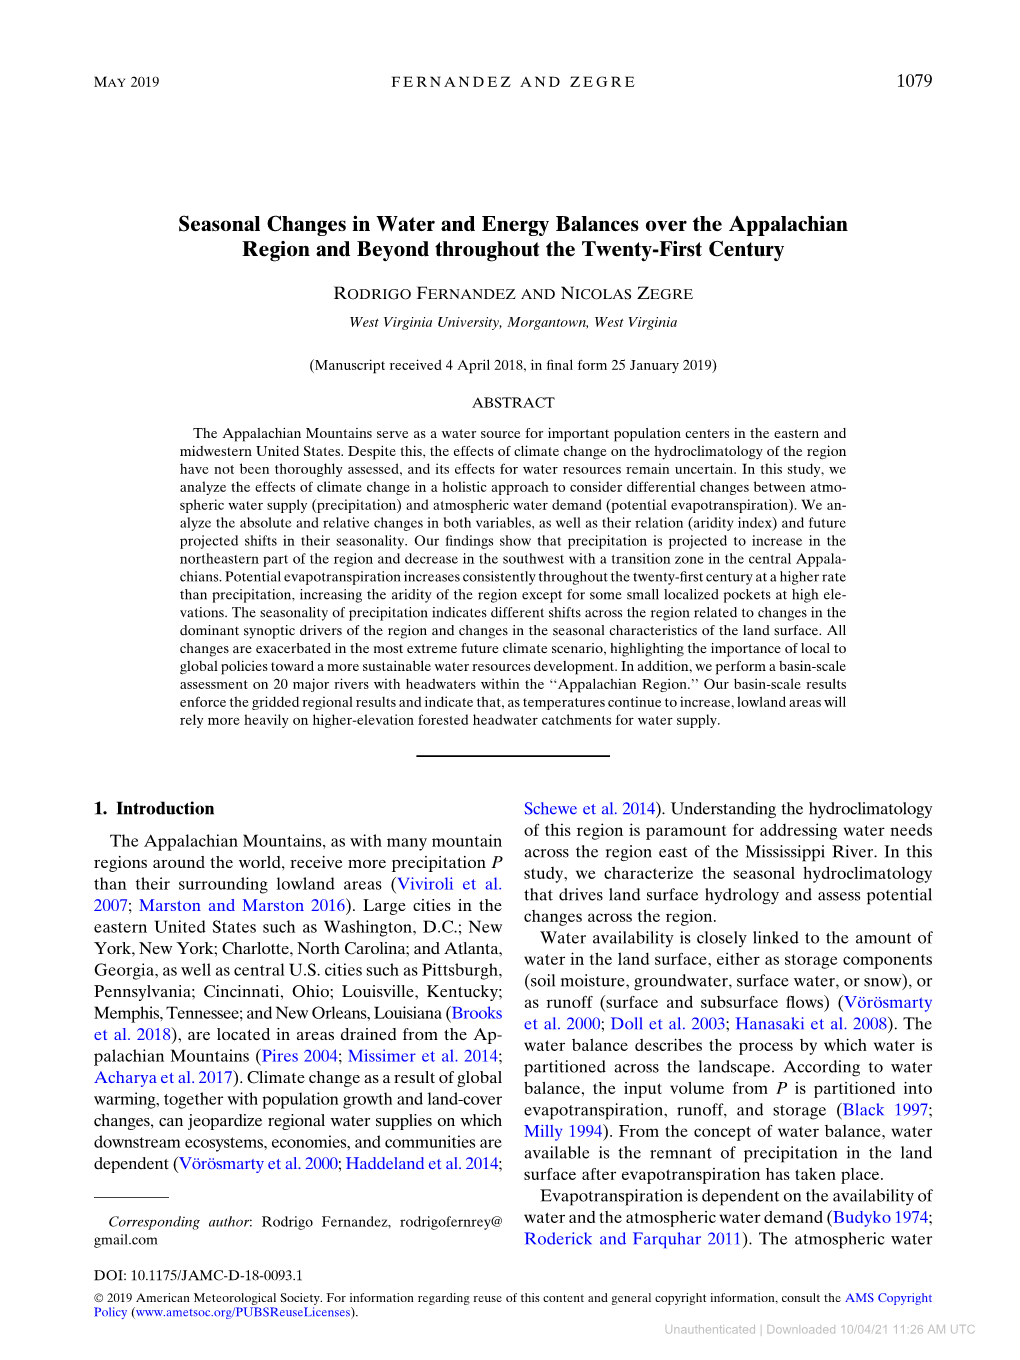 Seasonal Changes in Water and Energy Balances Over the Appalachian Region and Beyond Throughout the Twenty-First Century